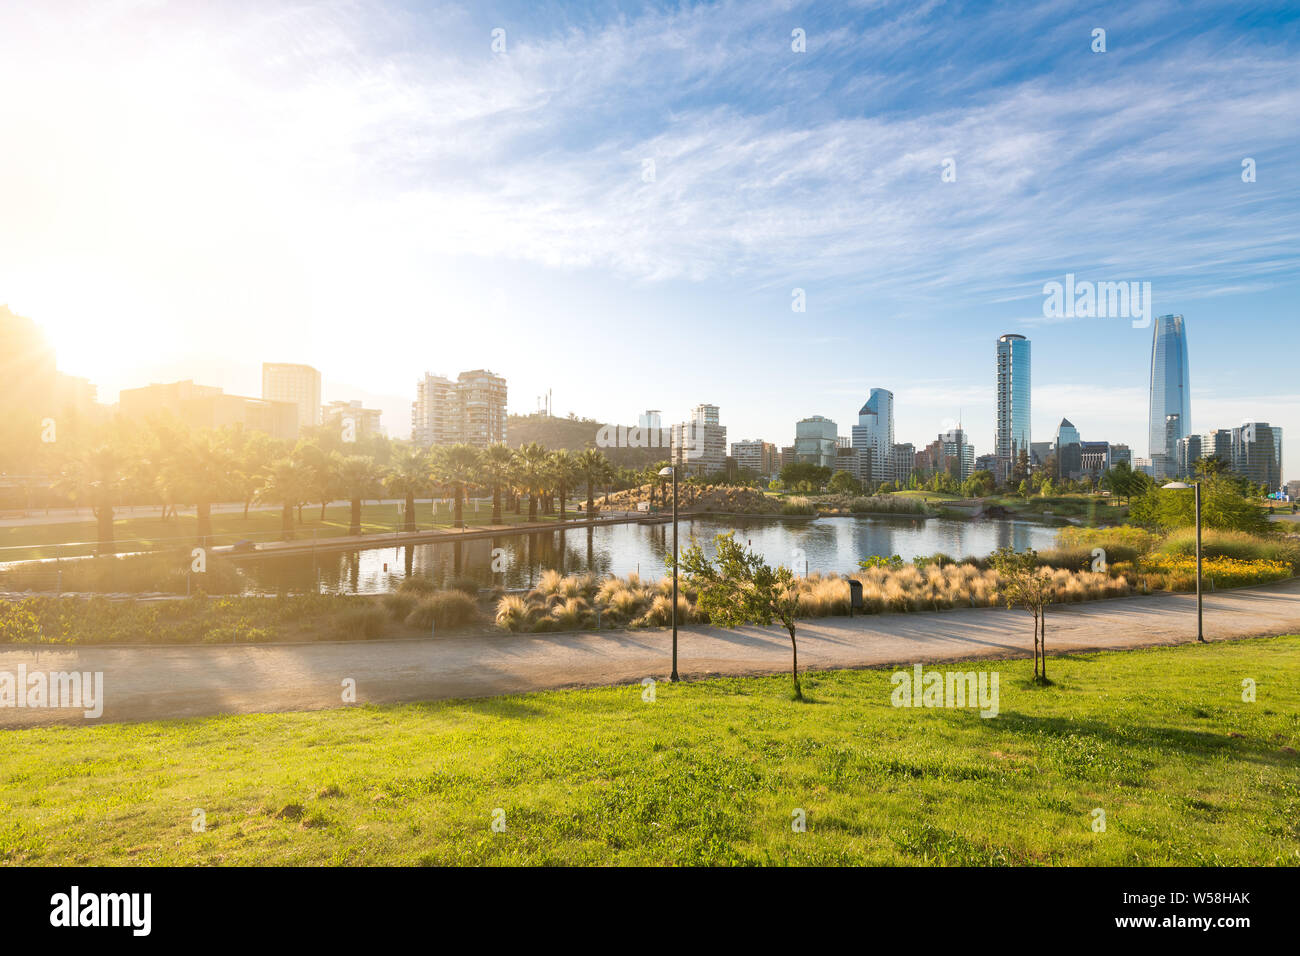 Skyline of buildings at Las Condes district and the pond at Bicentennial Park in Vitacura, Santiago de Chile Stock Photo